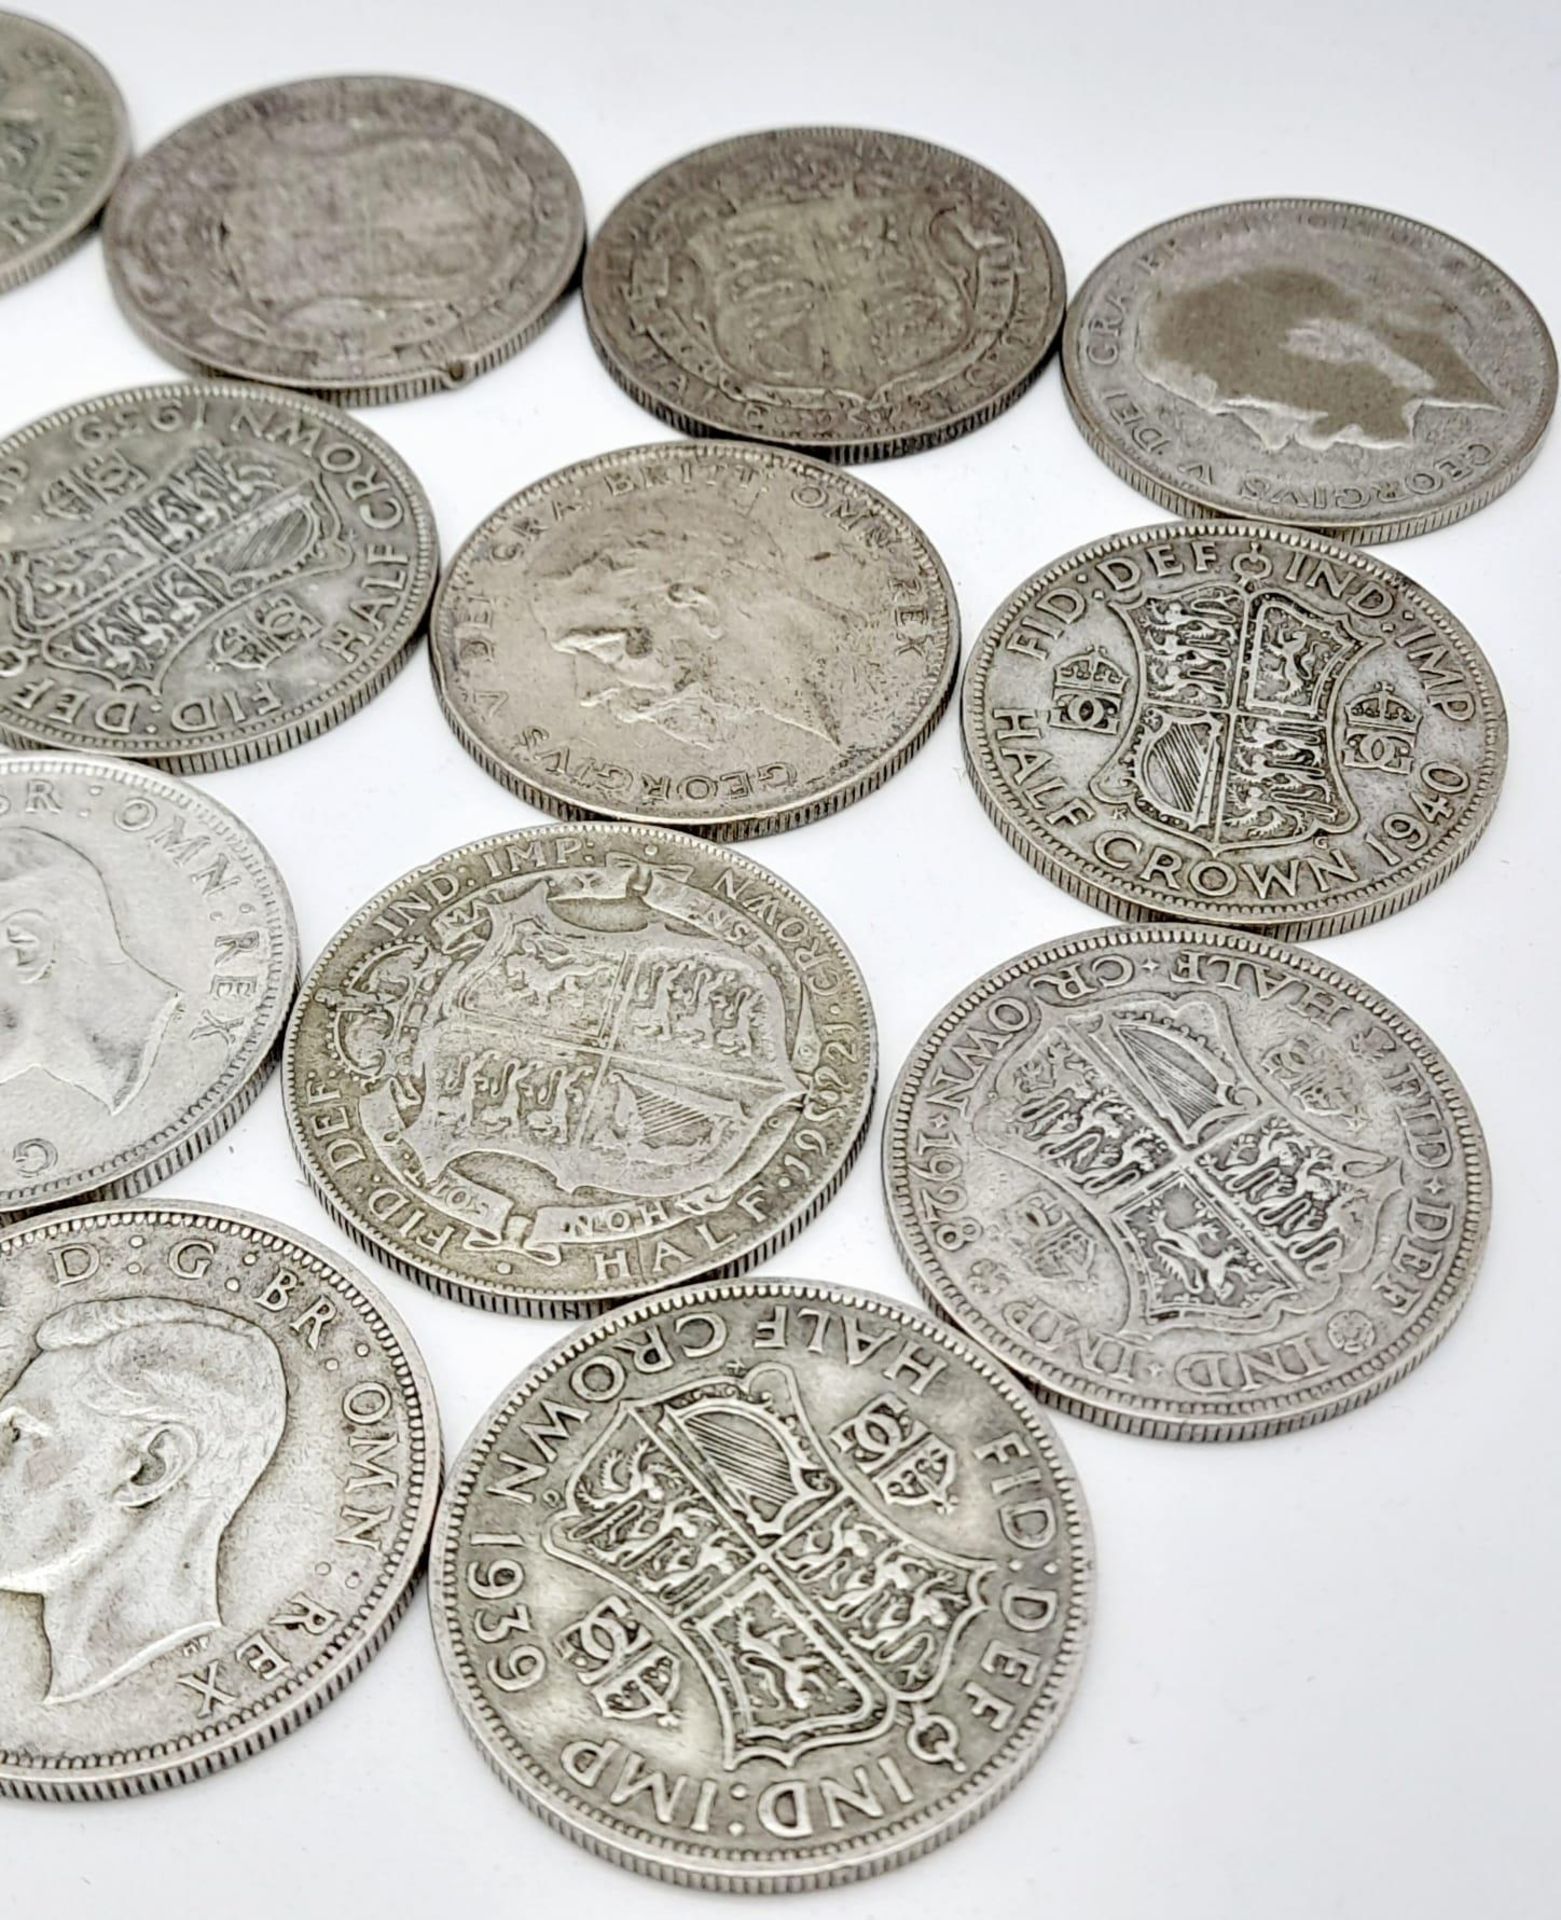 19 Pre 1947 British Silver Half Crown Coins. 265g total weight. - Image 3 of 4